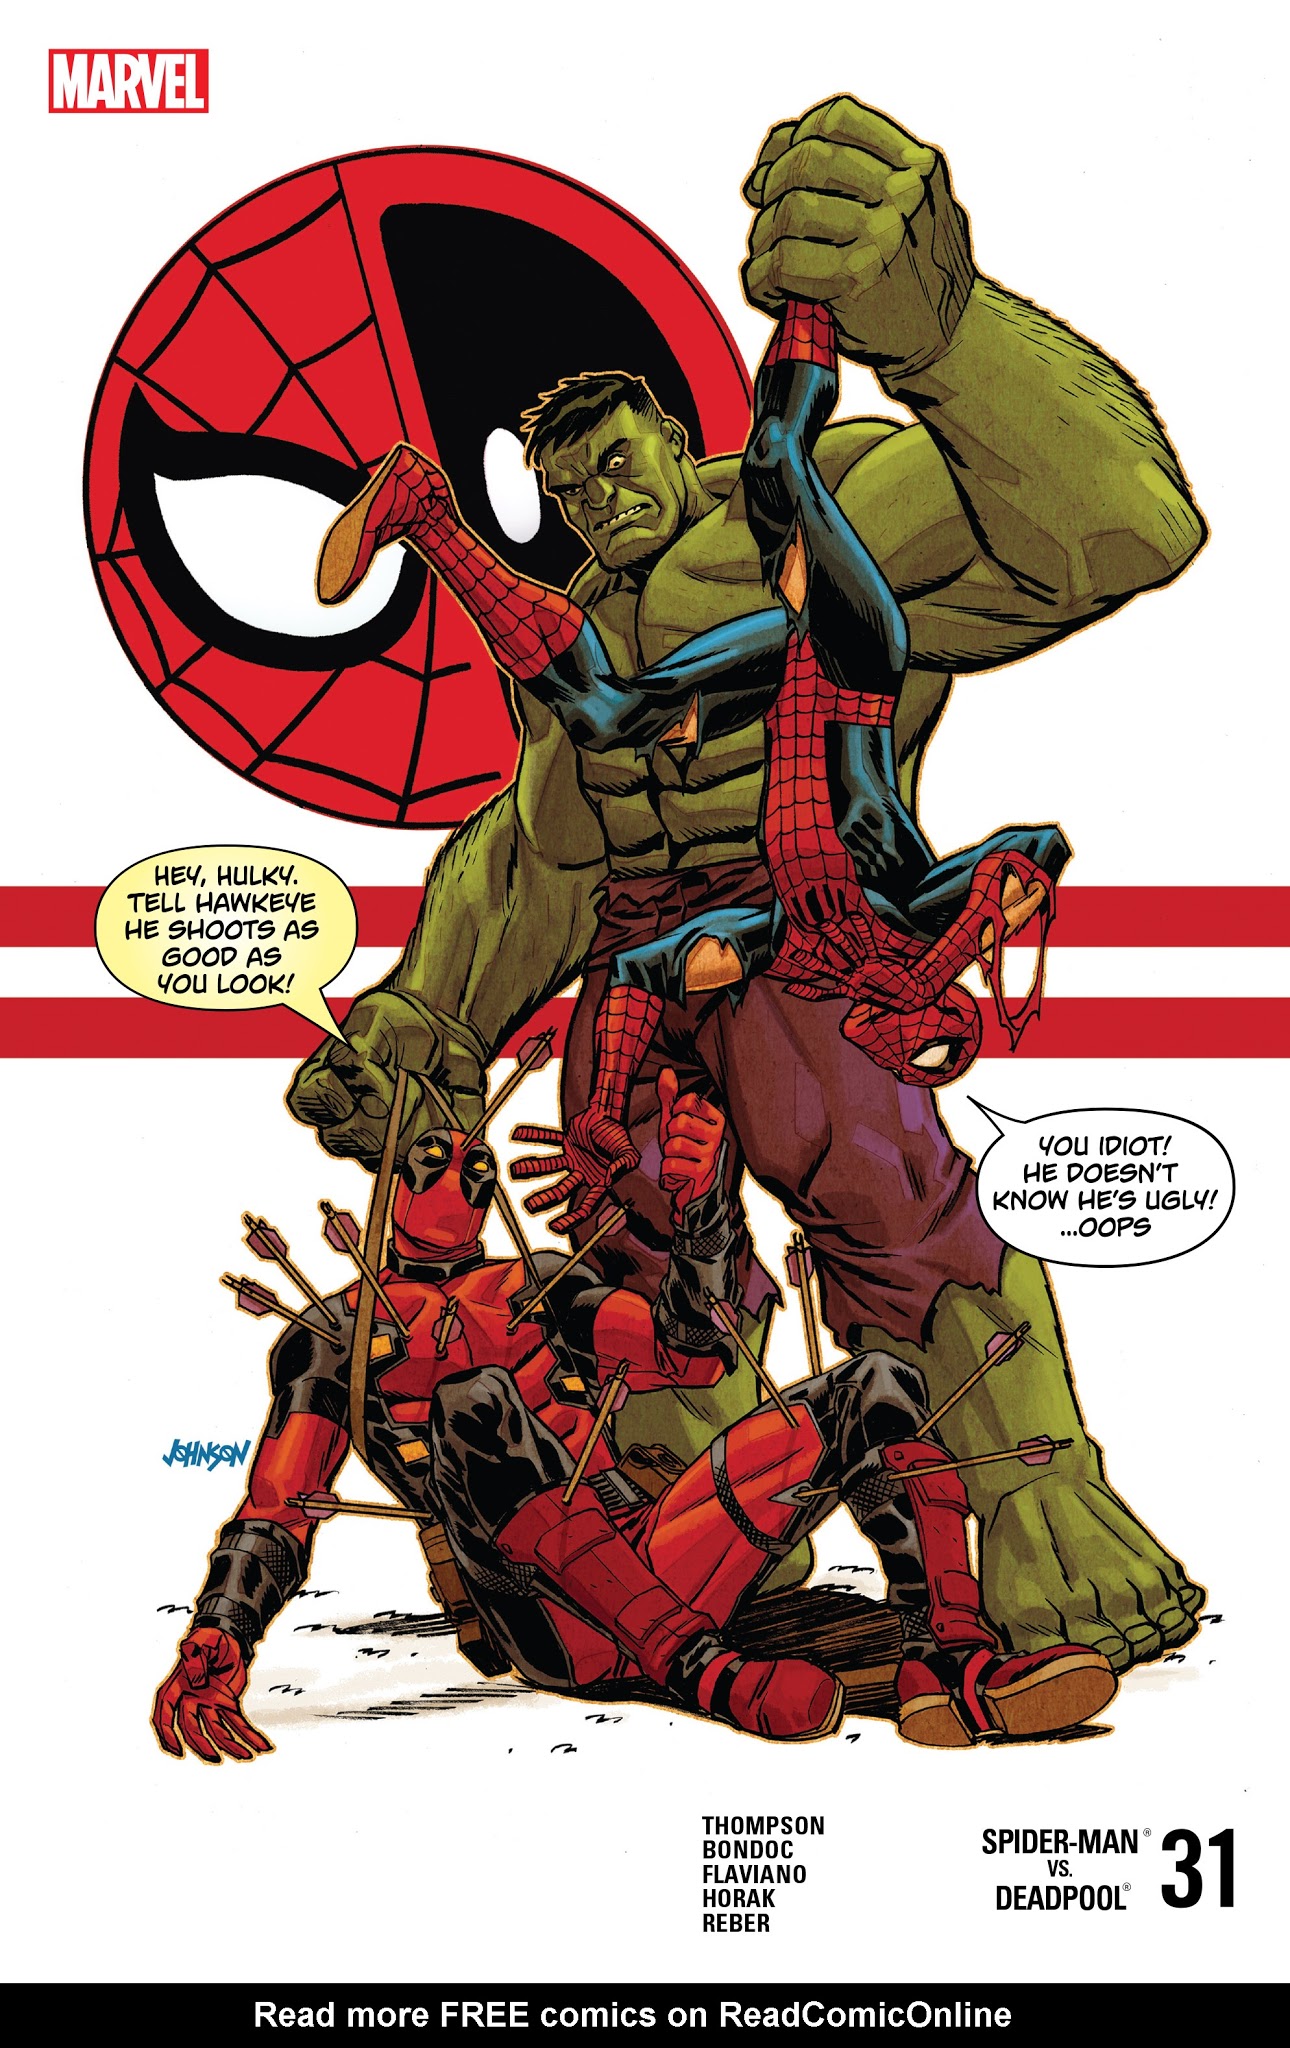 Spider Man Deadpool Issue 31 | Read Spider Man Deadpool Issue 31 comic  online in high quality. Read Full Comic online for free - Read comics online  in high quality .| READ COMIC ONLINE